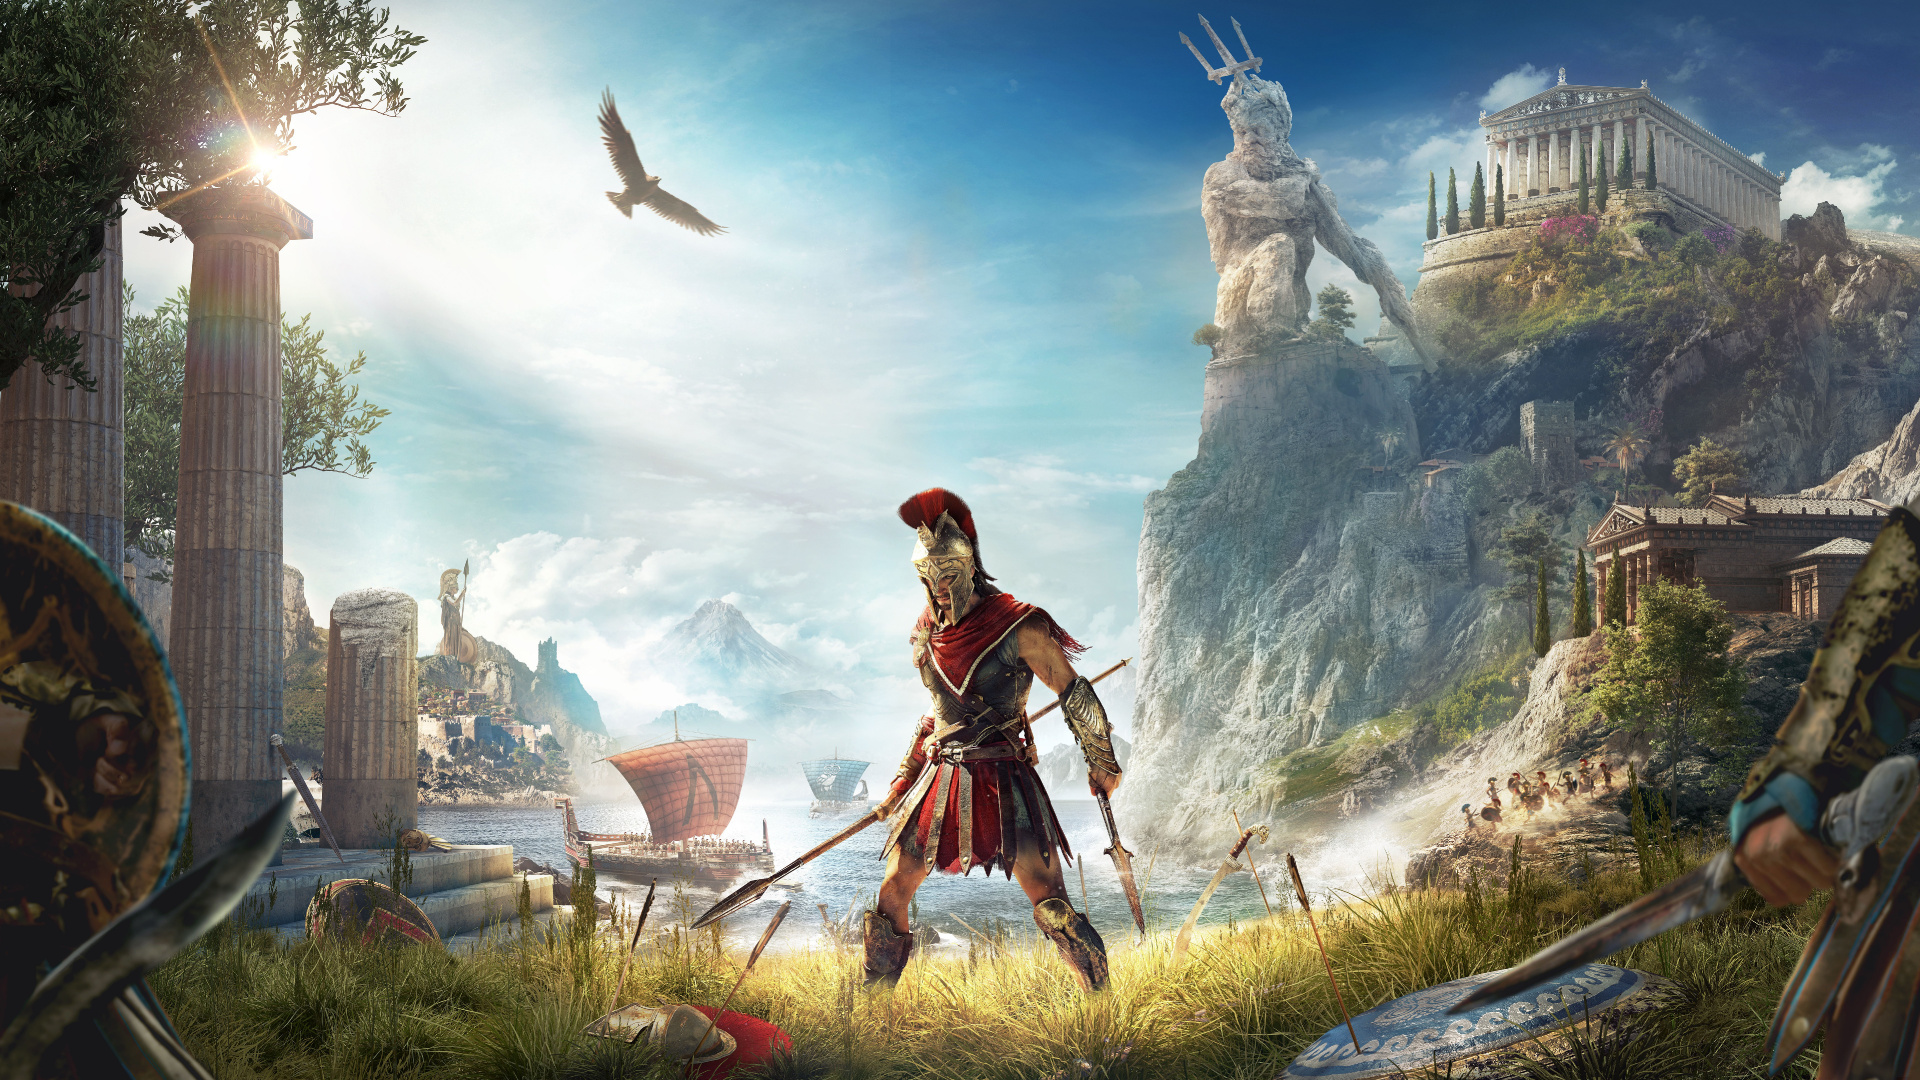 Assassins Creed Odyssey, Ubisoft, pc Game, Games, Mythology. Wallpaper in 1920x1080 Resolution